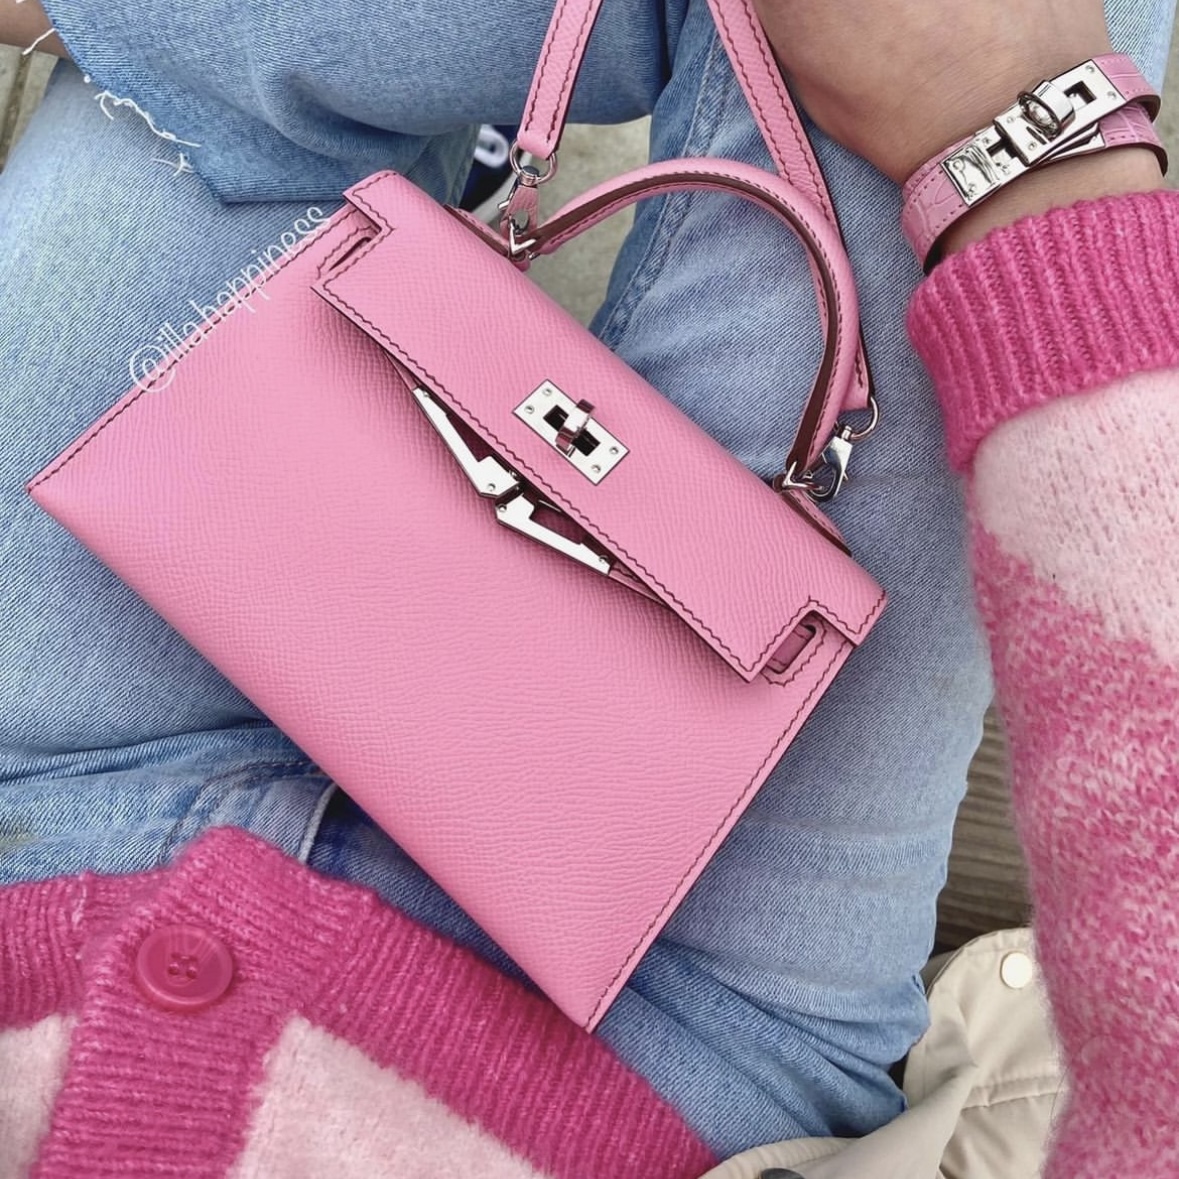 Top 10 Most Expensive Hermès Bag Colors Ranked By Resale Value